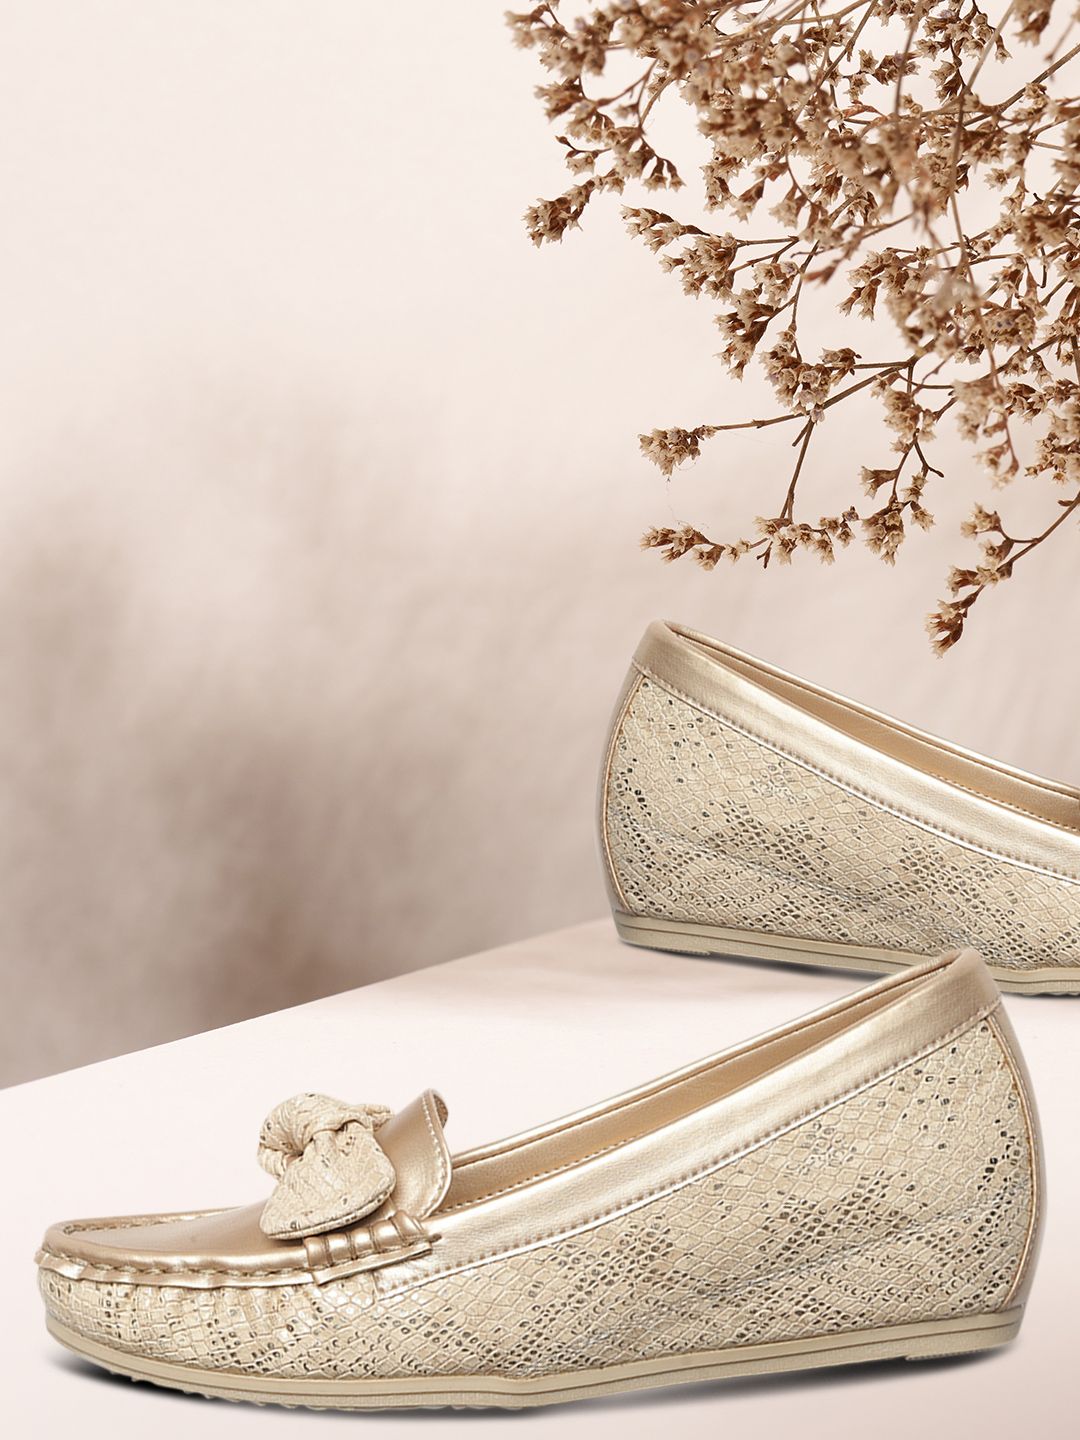 Marc Loire Gold-Toned & Beige Textured PU Ethnic Wedge Pumps with Bows Price in India